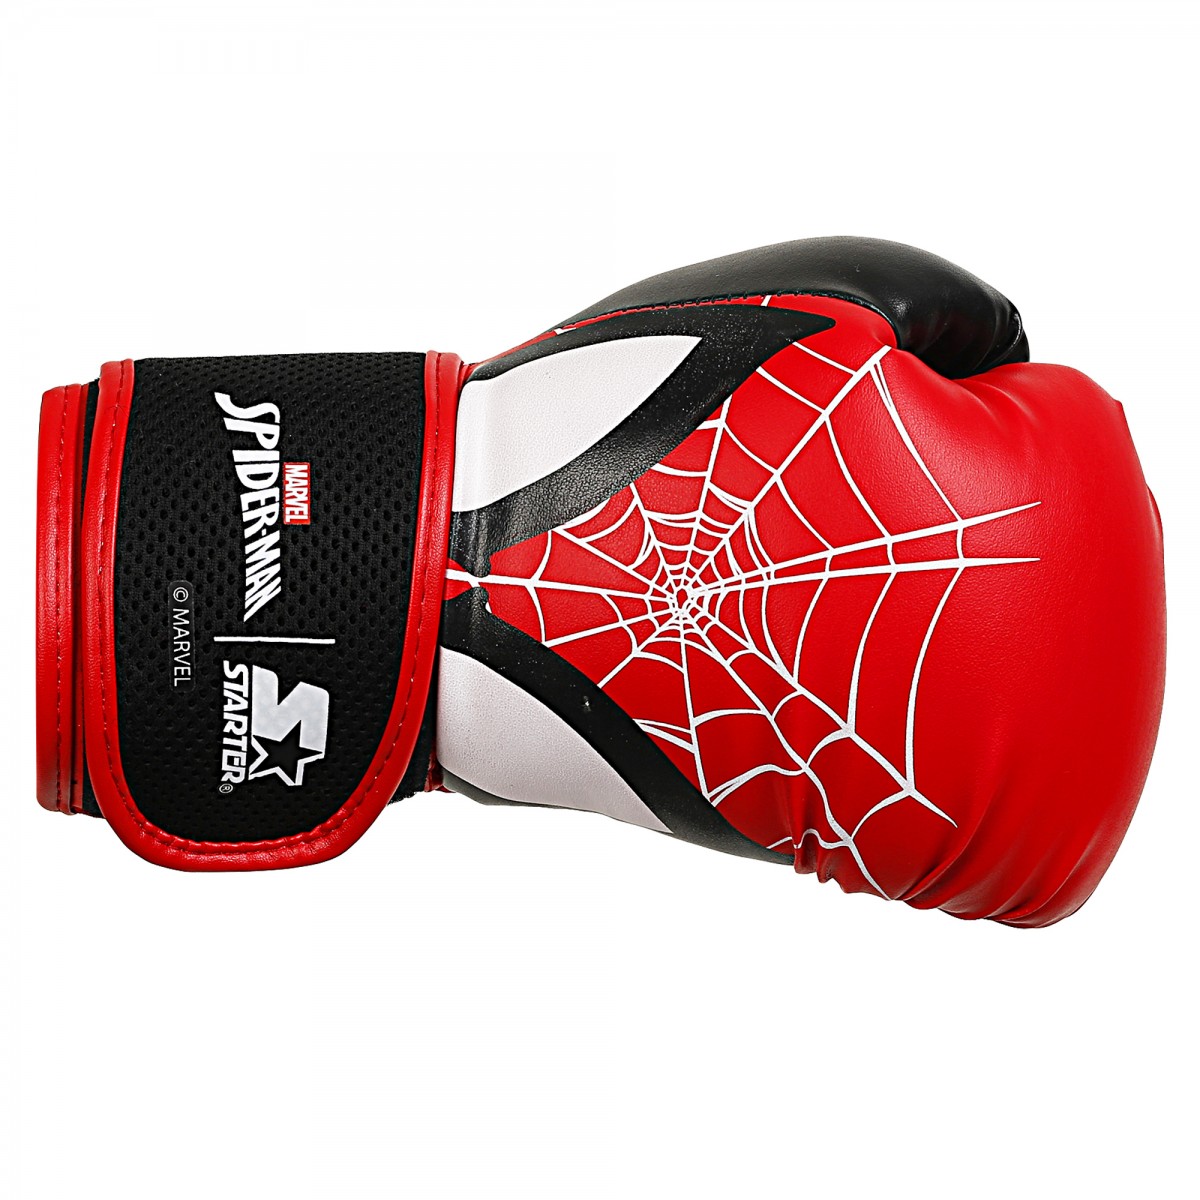 Marvel Spiderman Focus Pad & Gloves Set, Easy to Assemble, Boxing Gloves, Focus Pads , Kids for 3Y+, Red